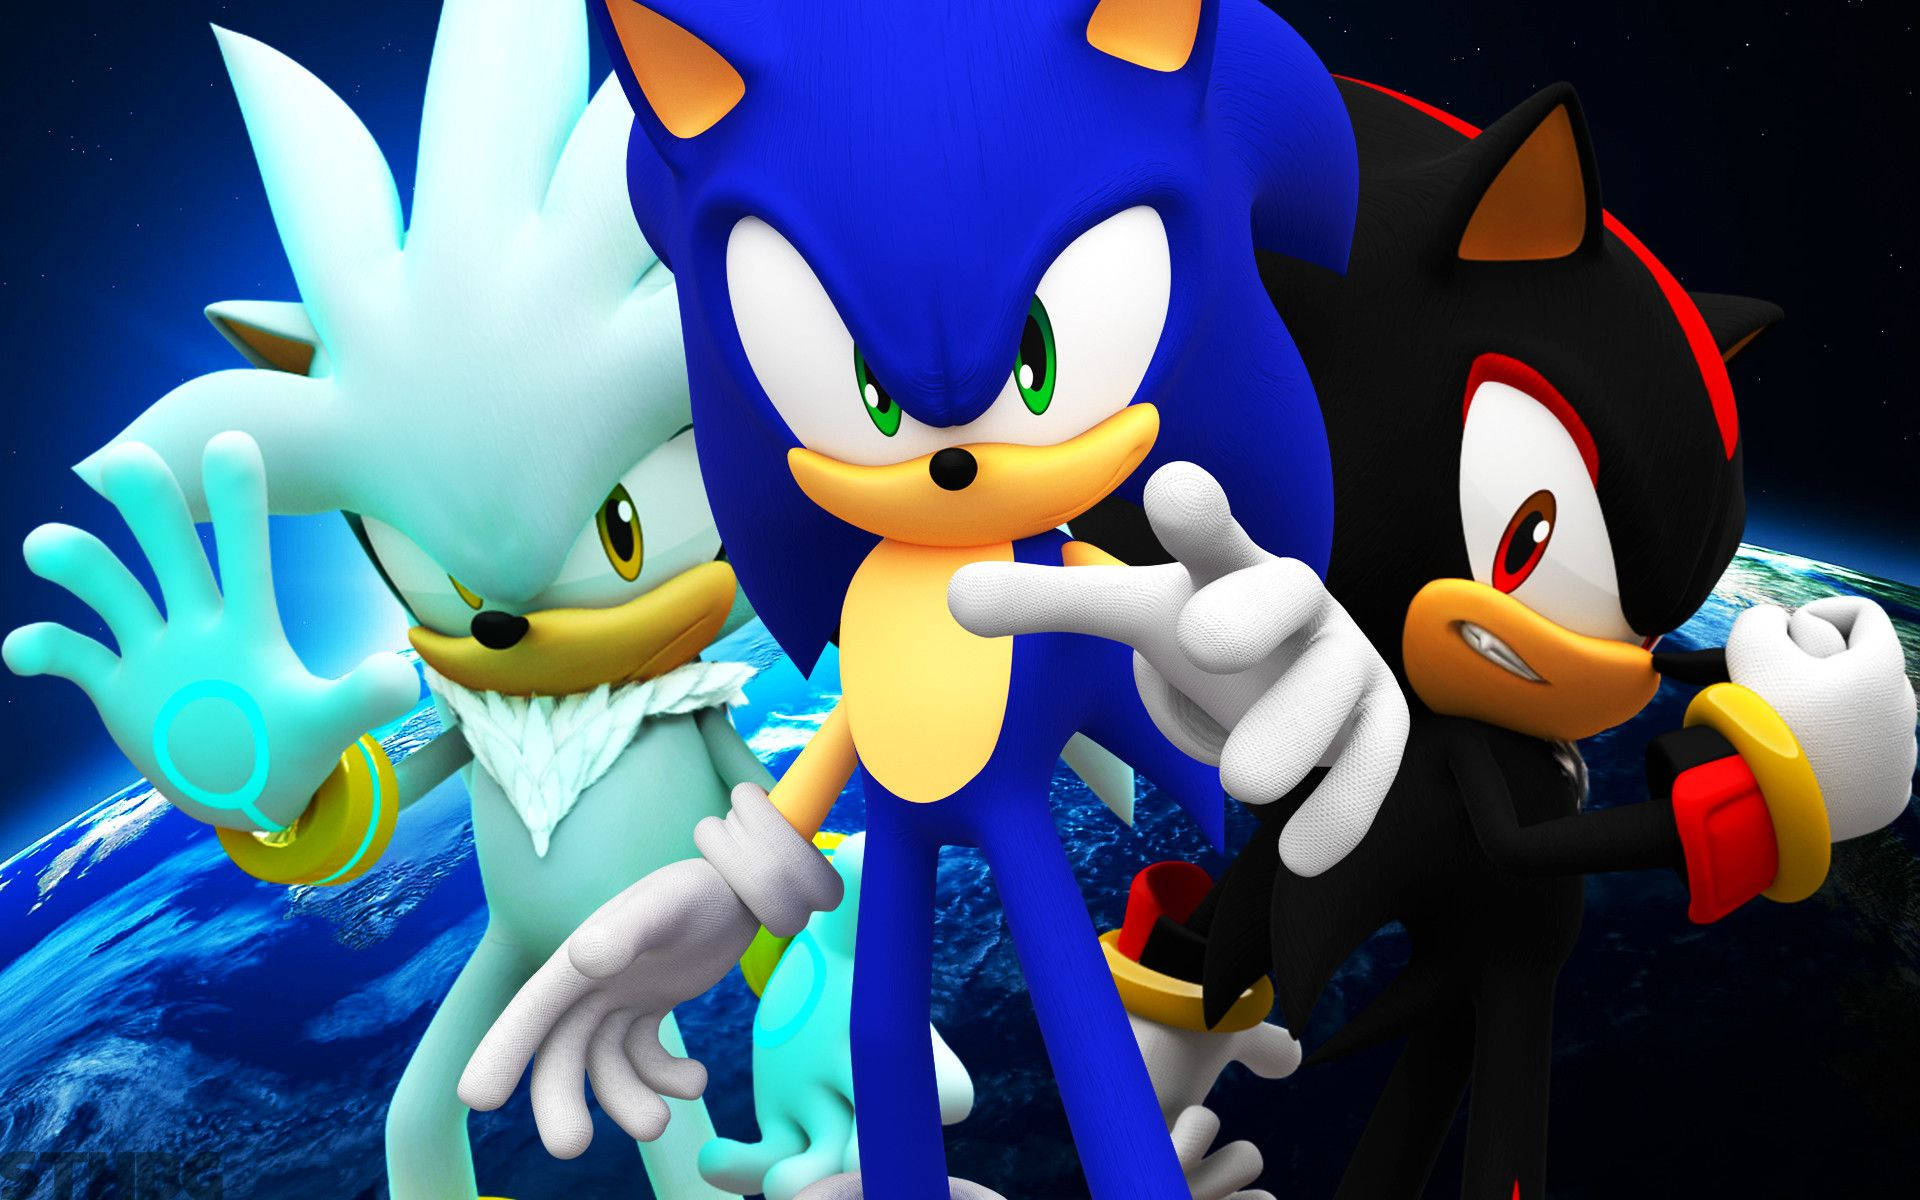 Silver Sonic And Shadow The Hedgehog Pfp Wallpaper